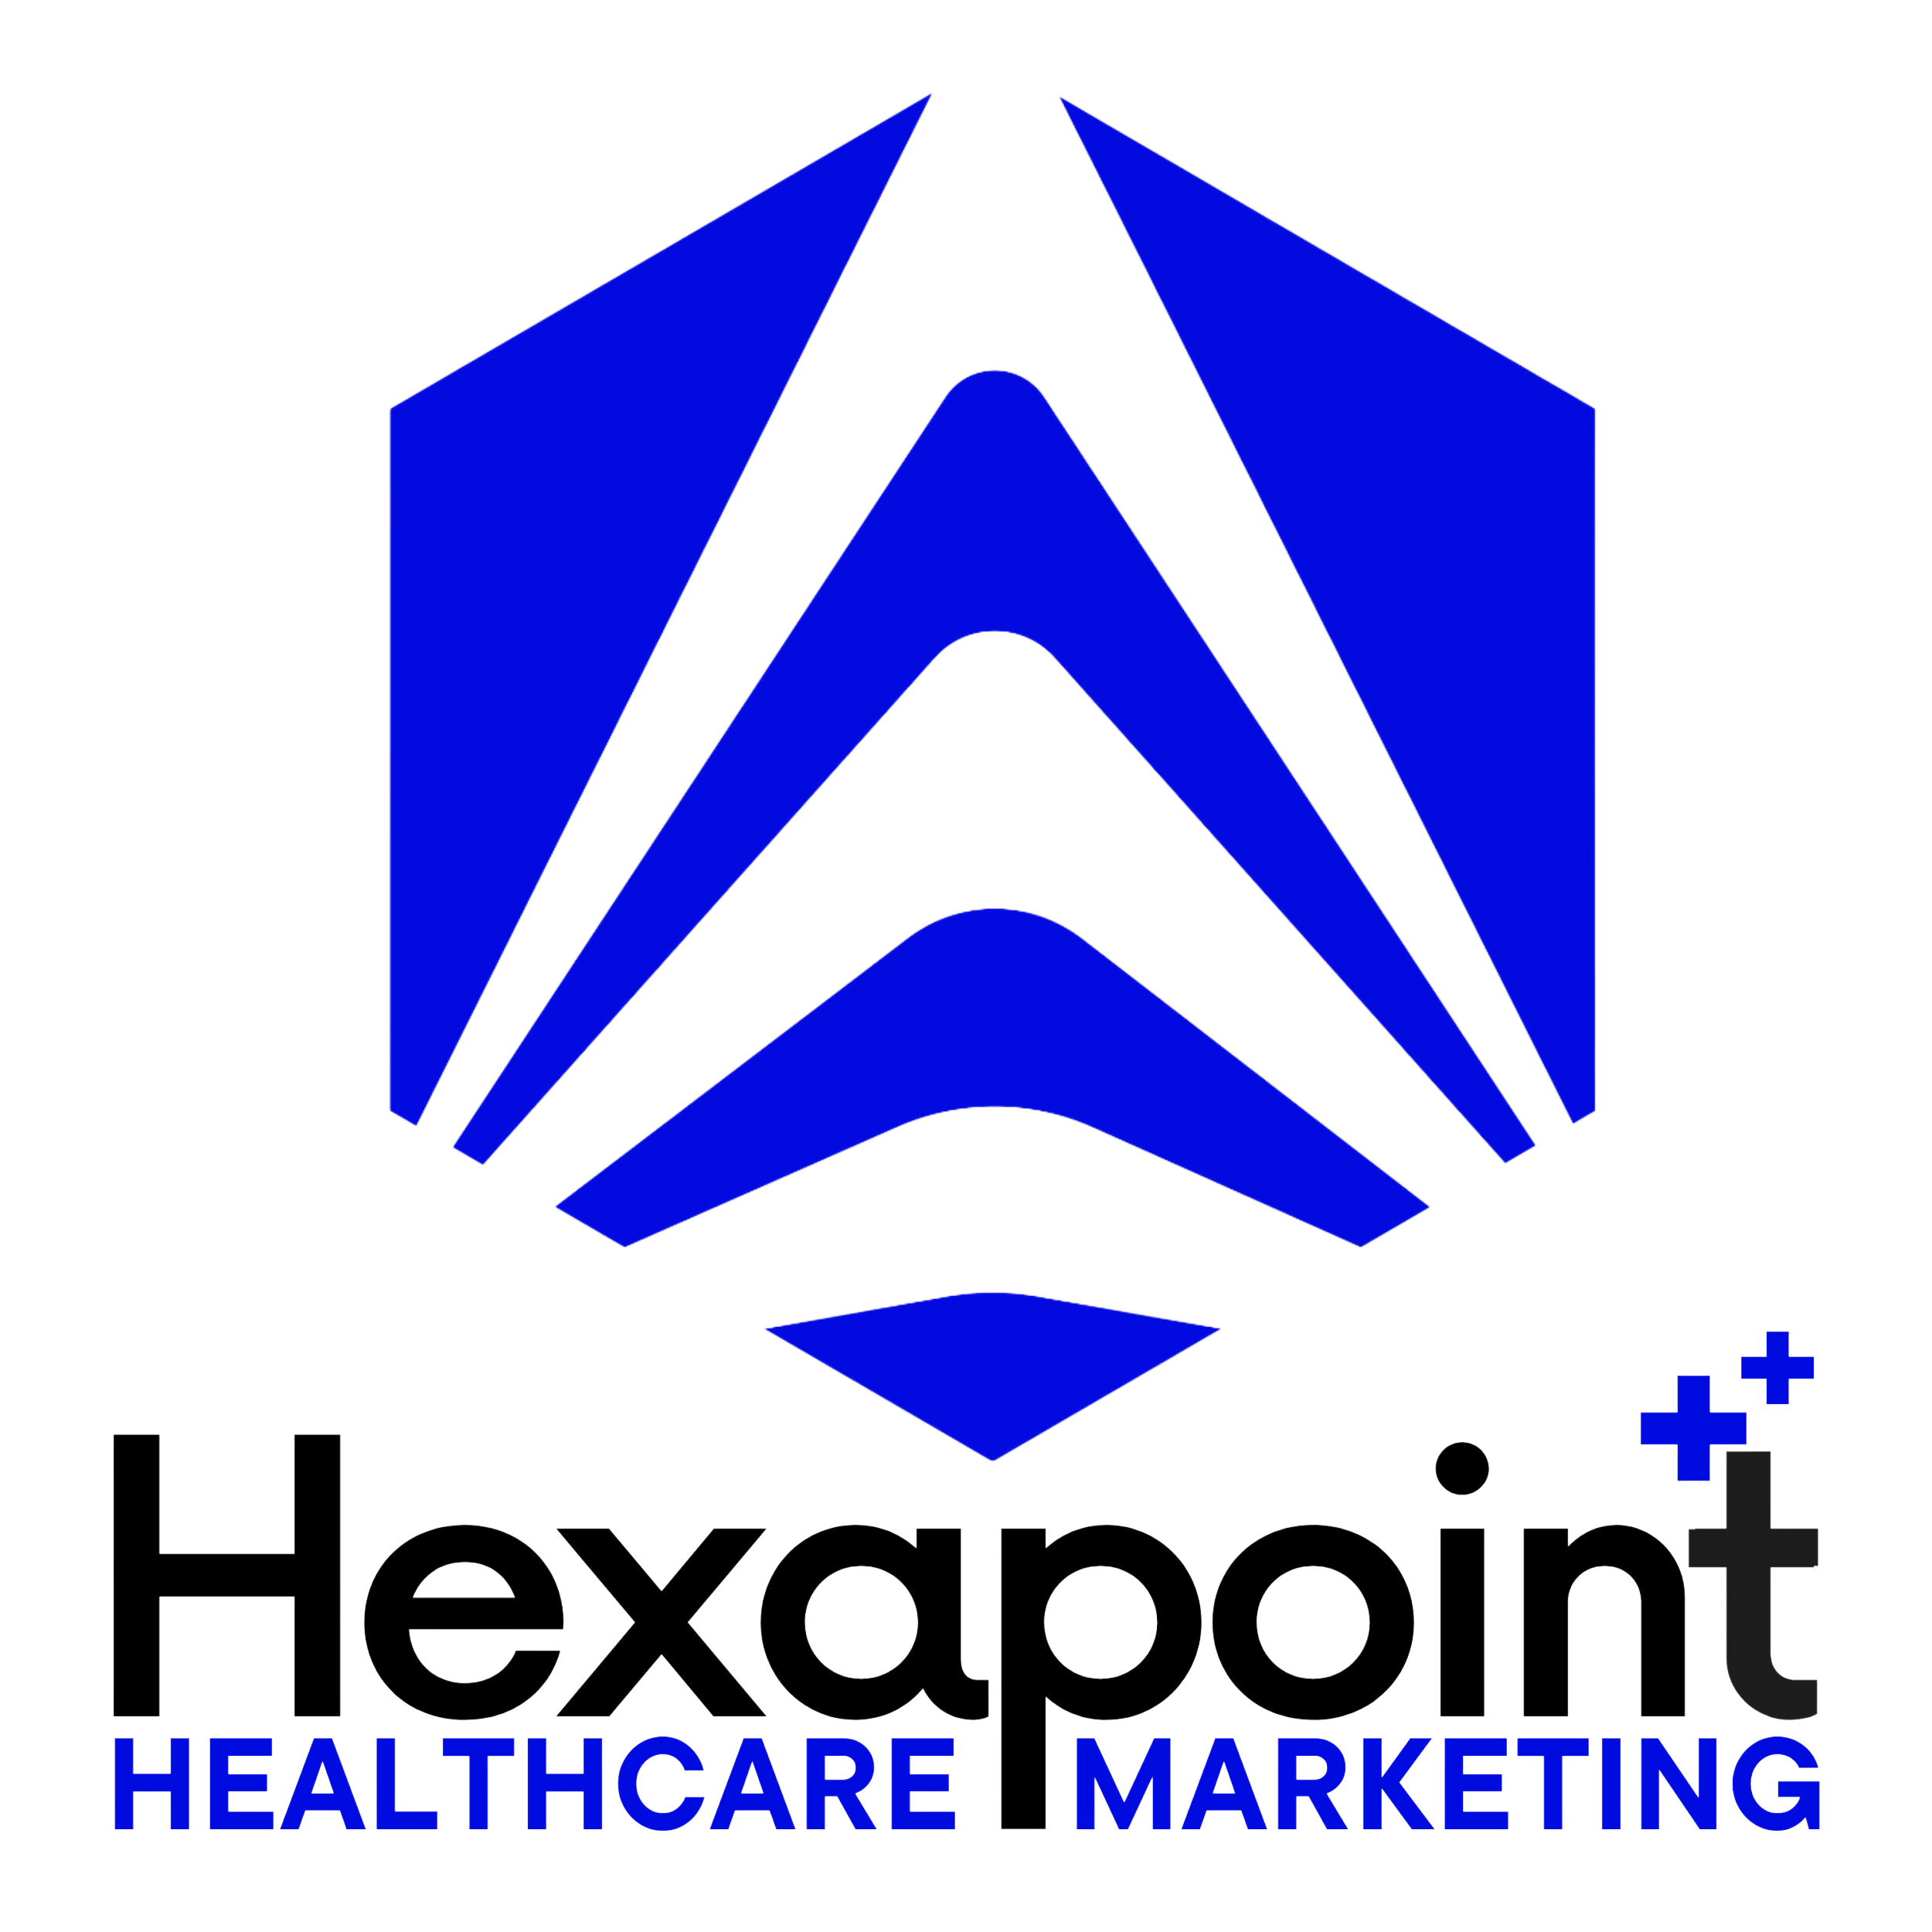 Hexapoint Healthcare Marketing